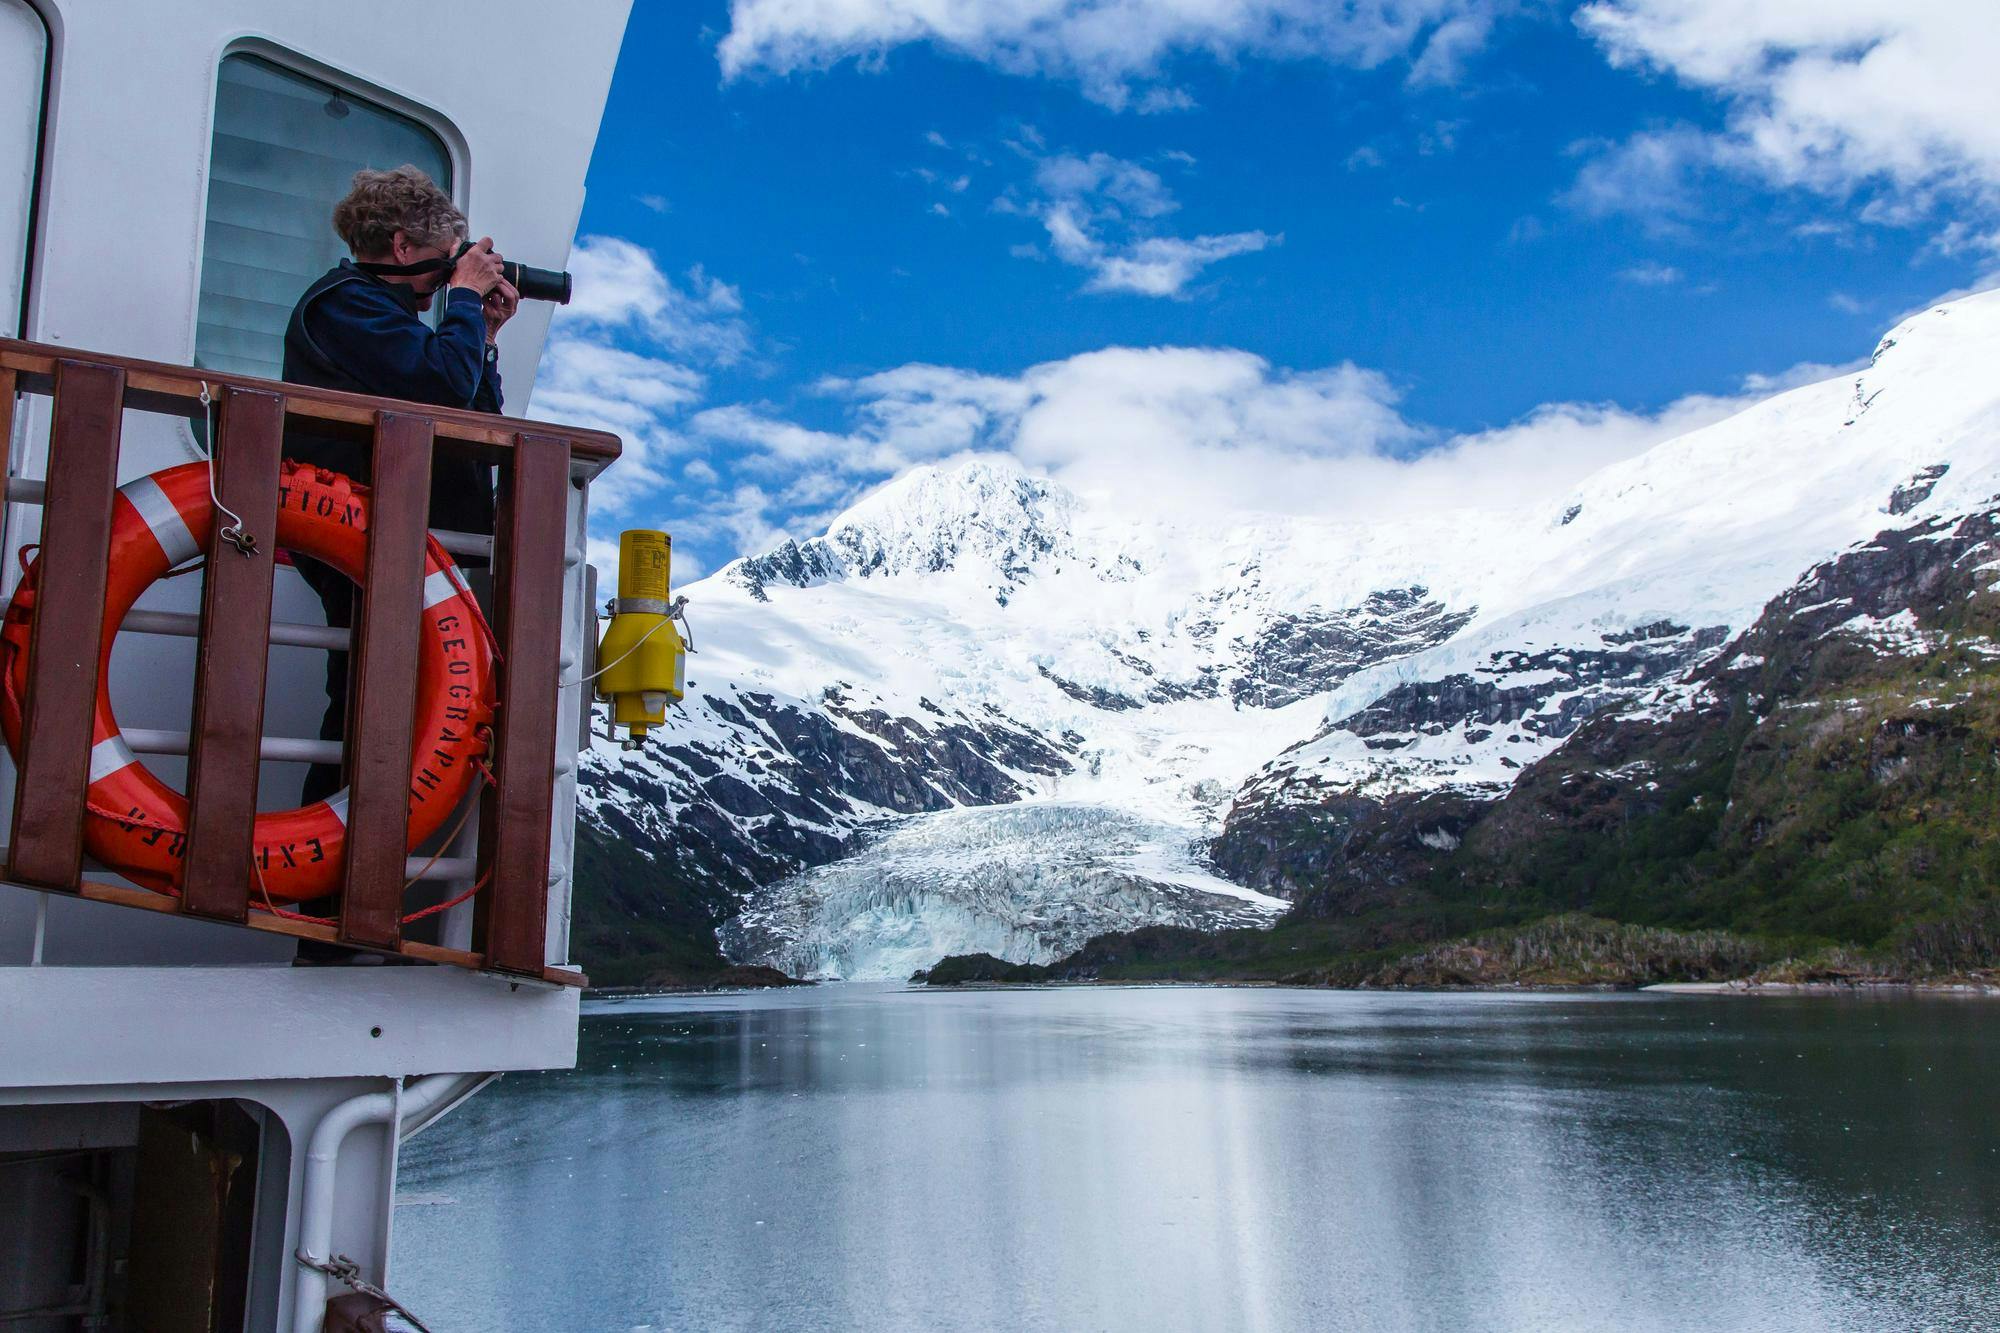 A guest photographing in the Strait of Magellan, Patagonia, Chile.